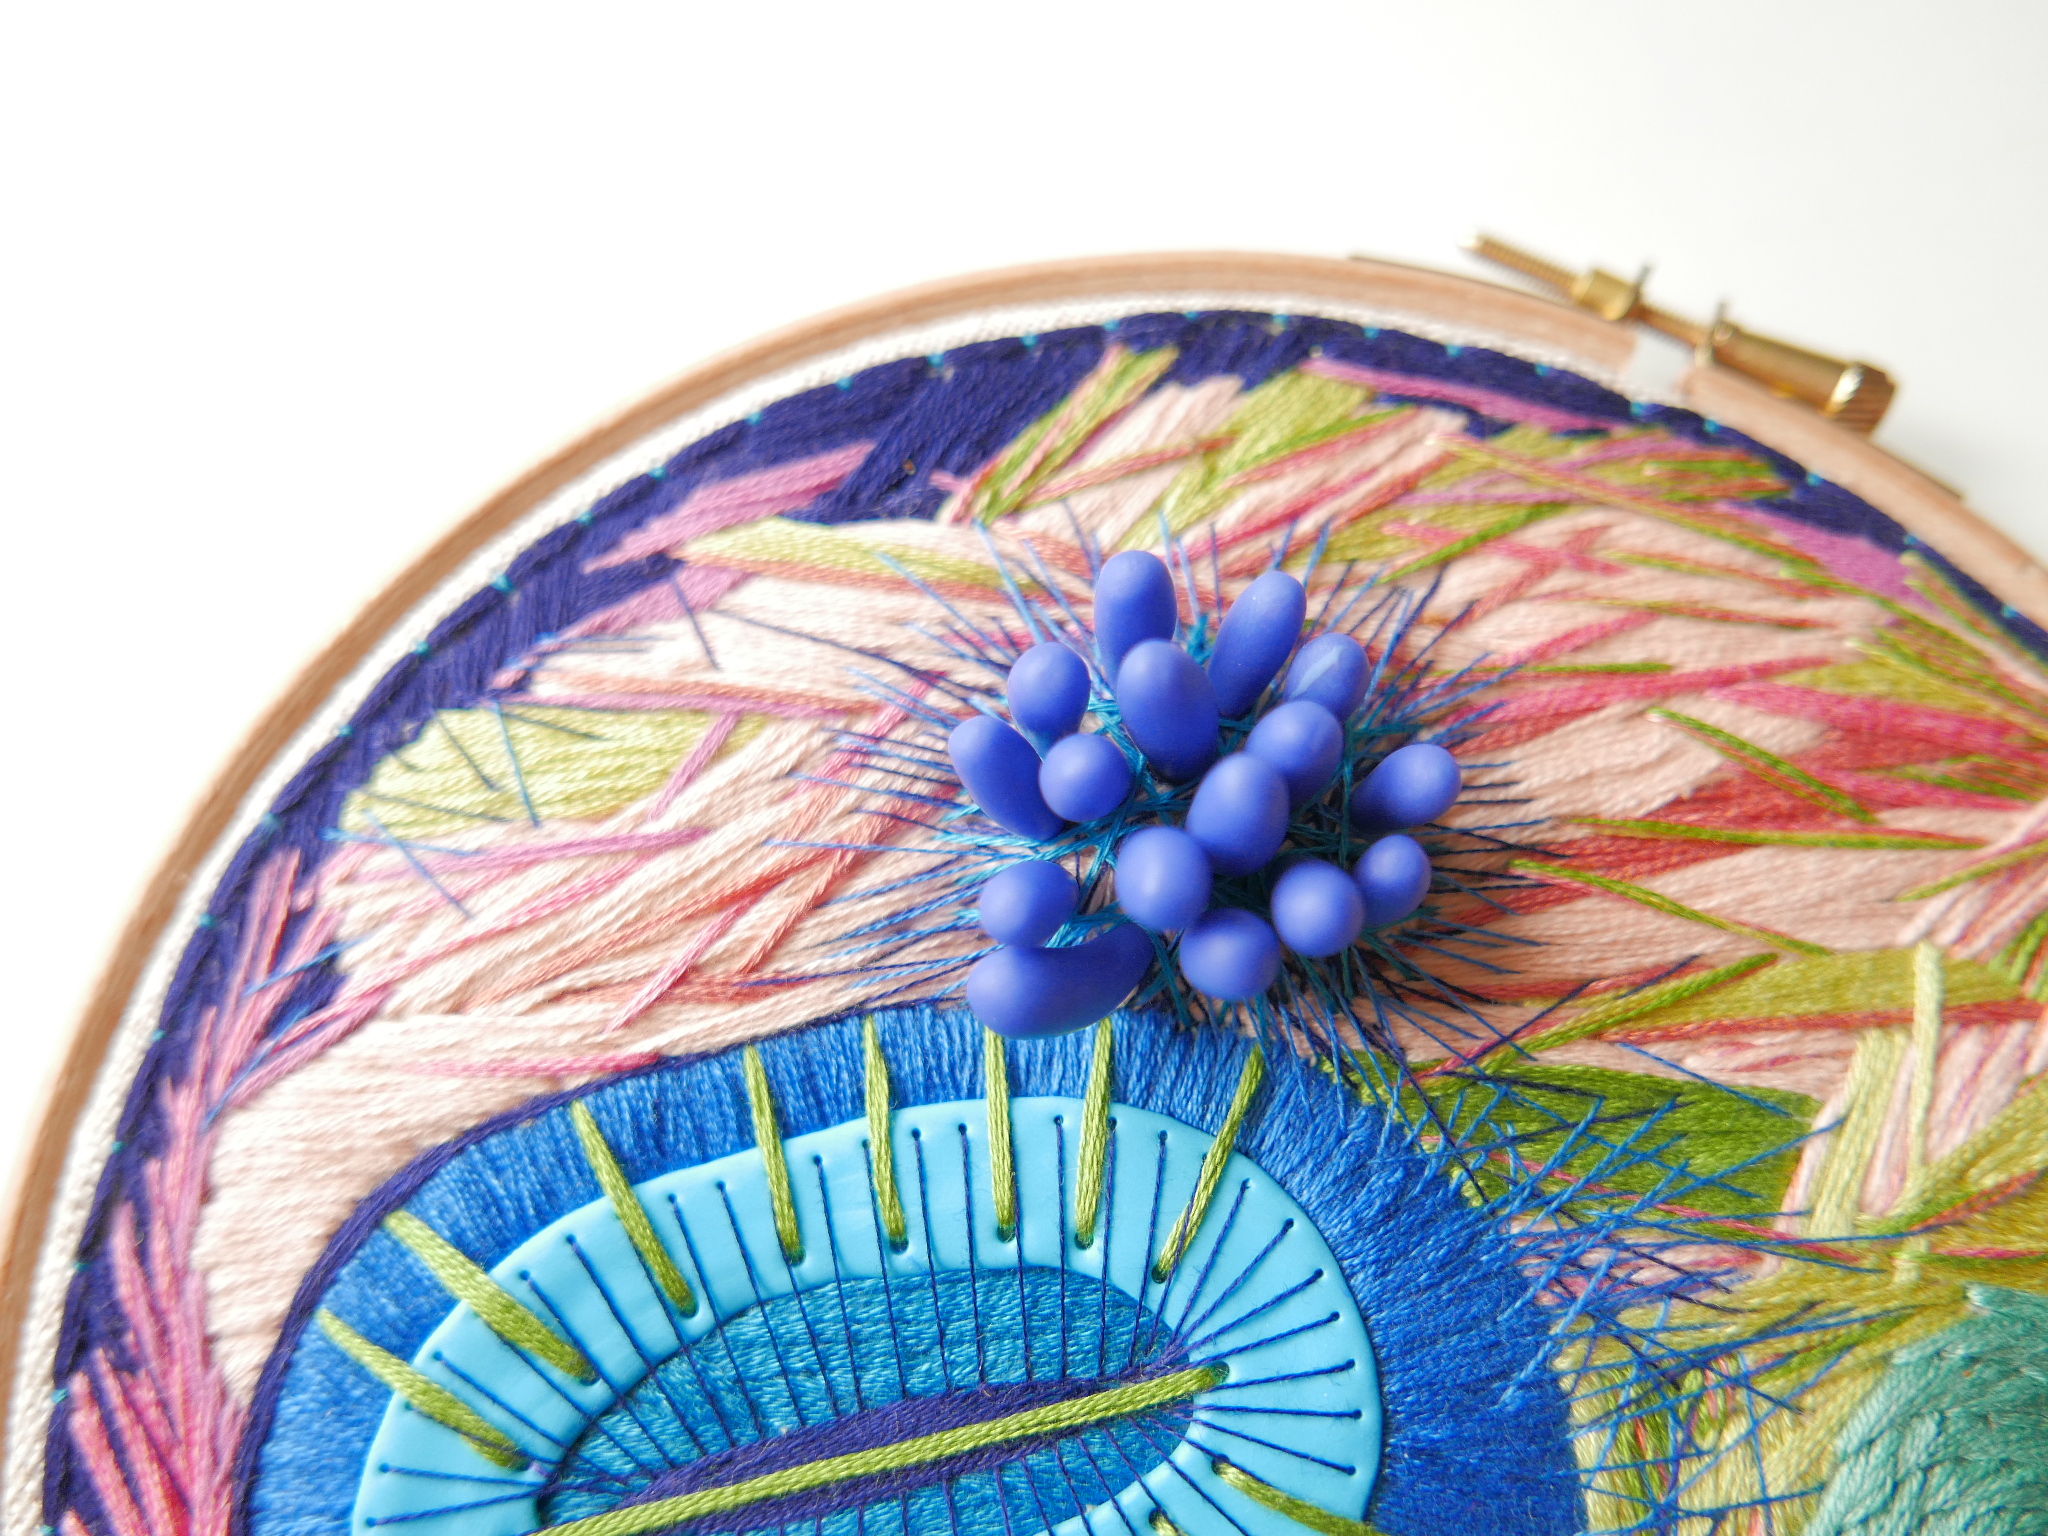 embroidery hoop with beautiful hand embroidery